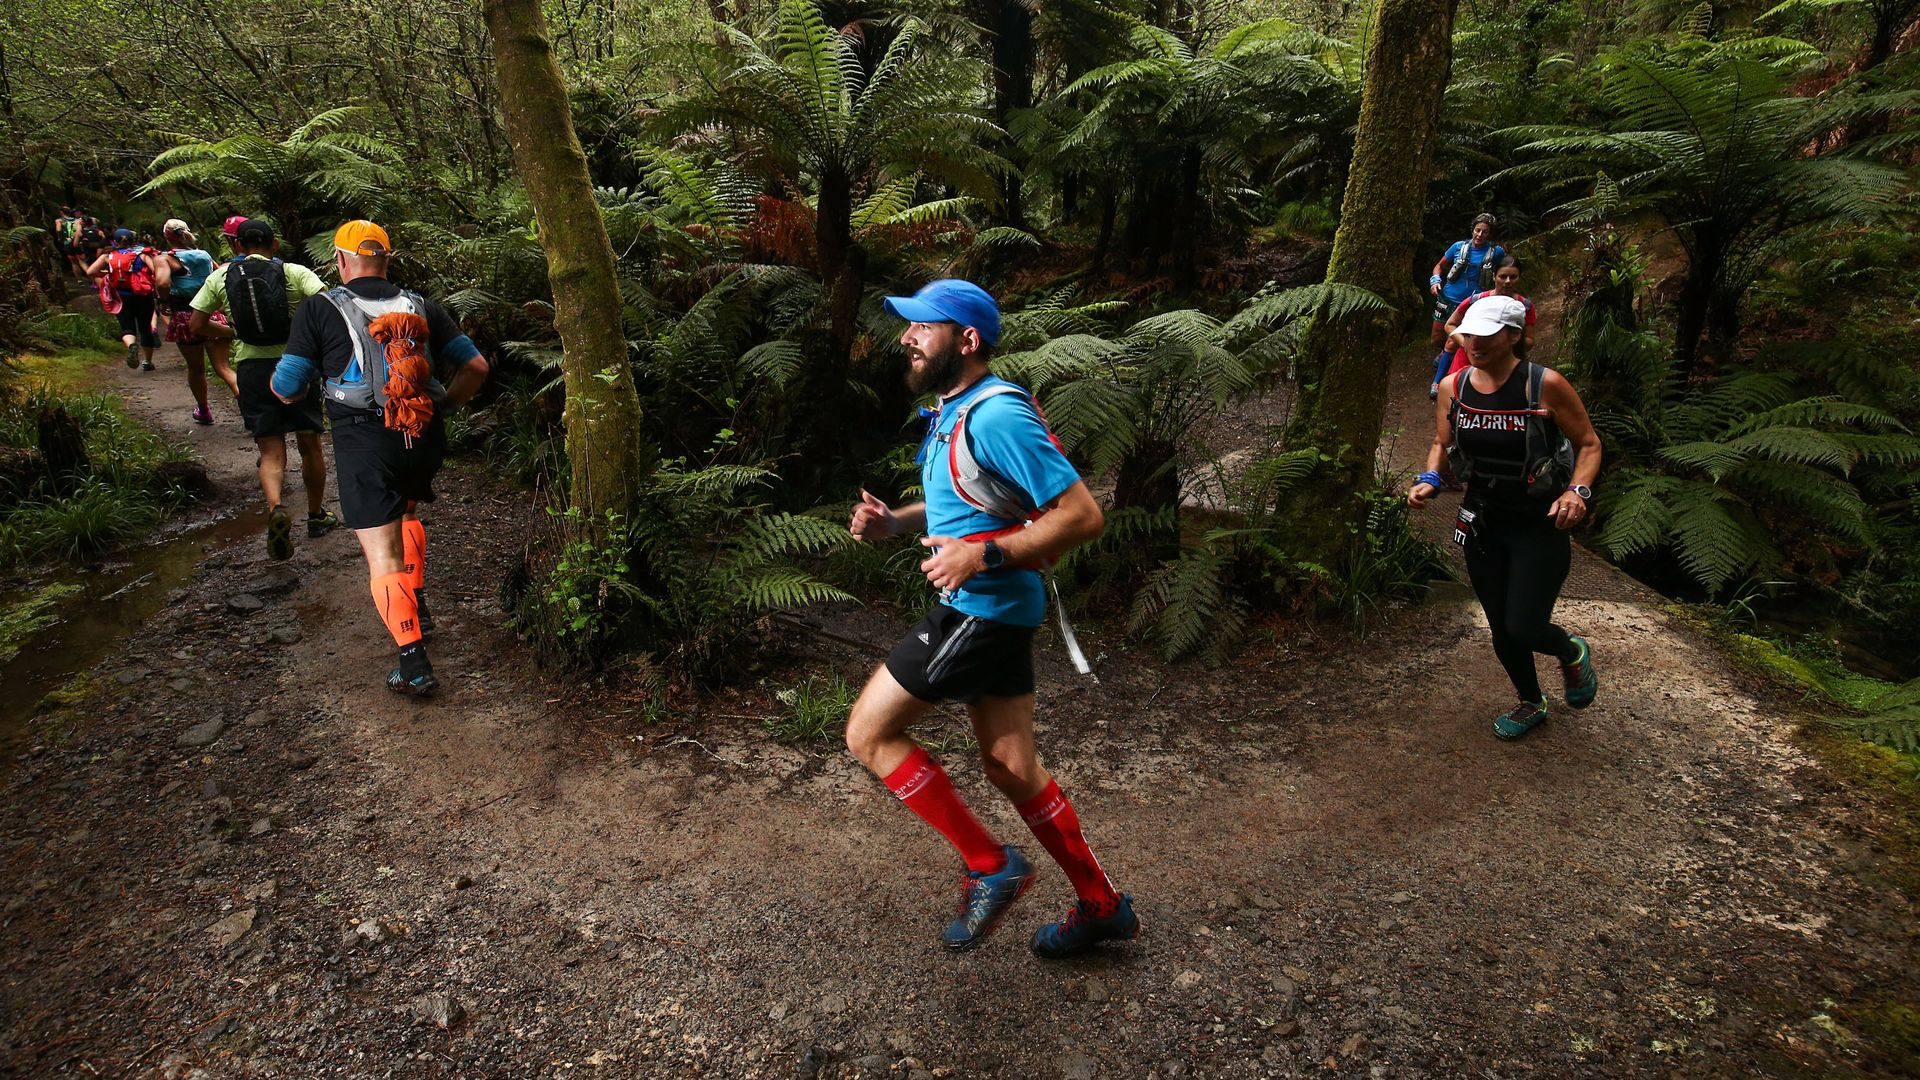 Trail runners in a forest. 